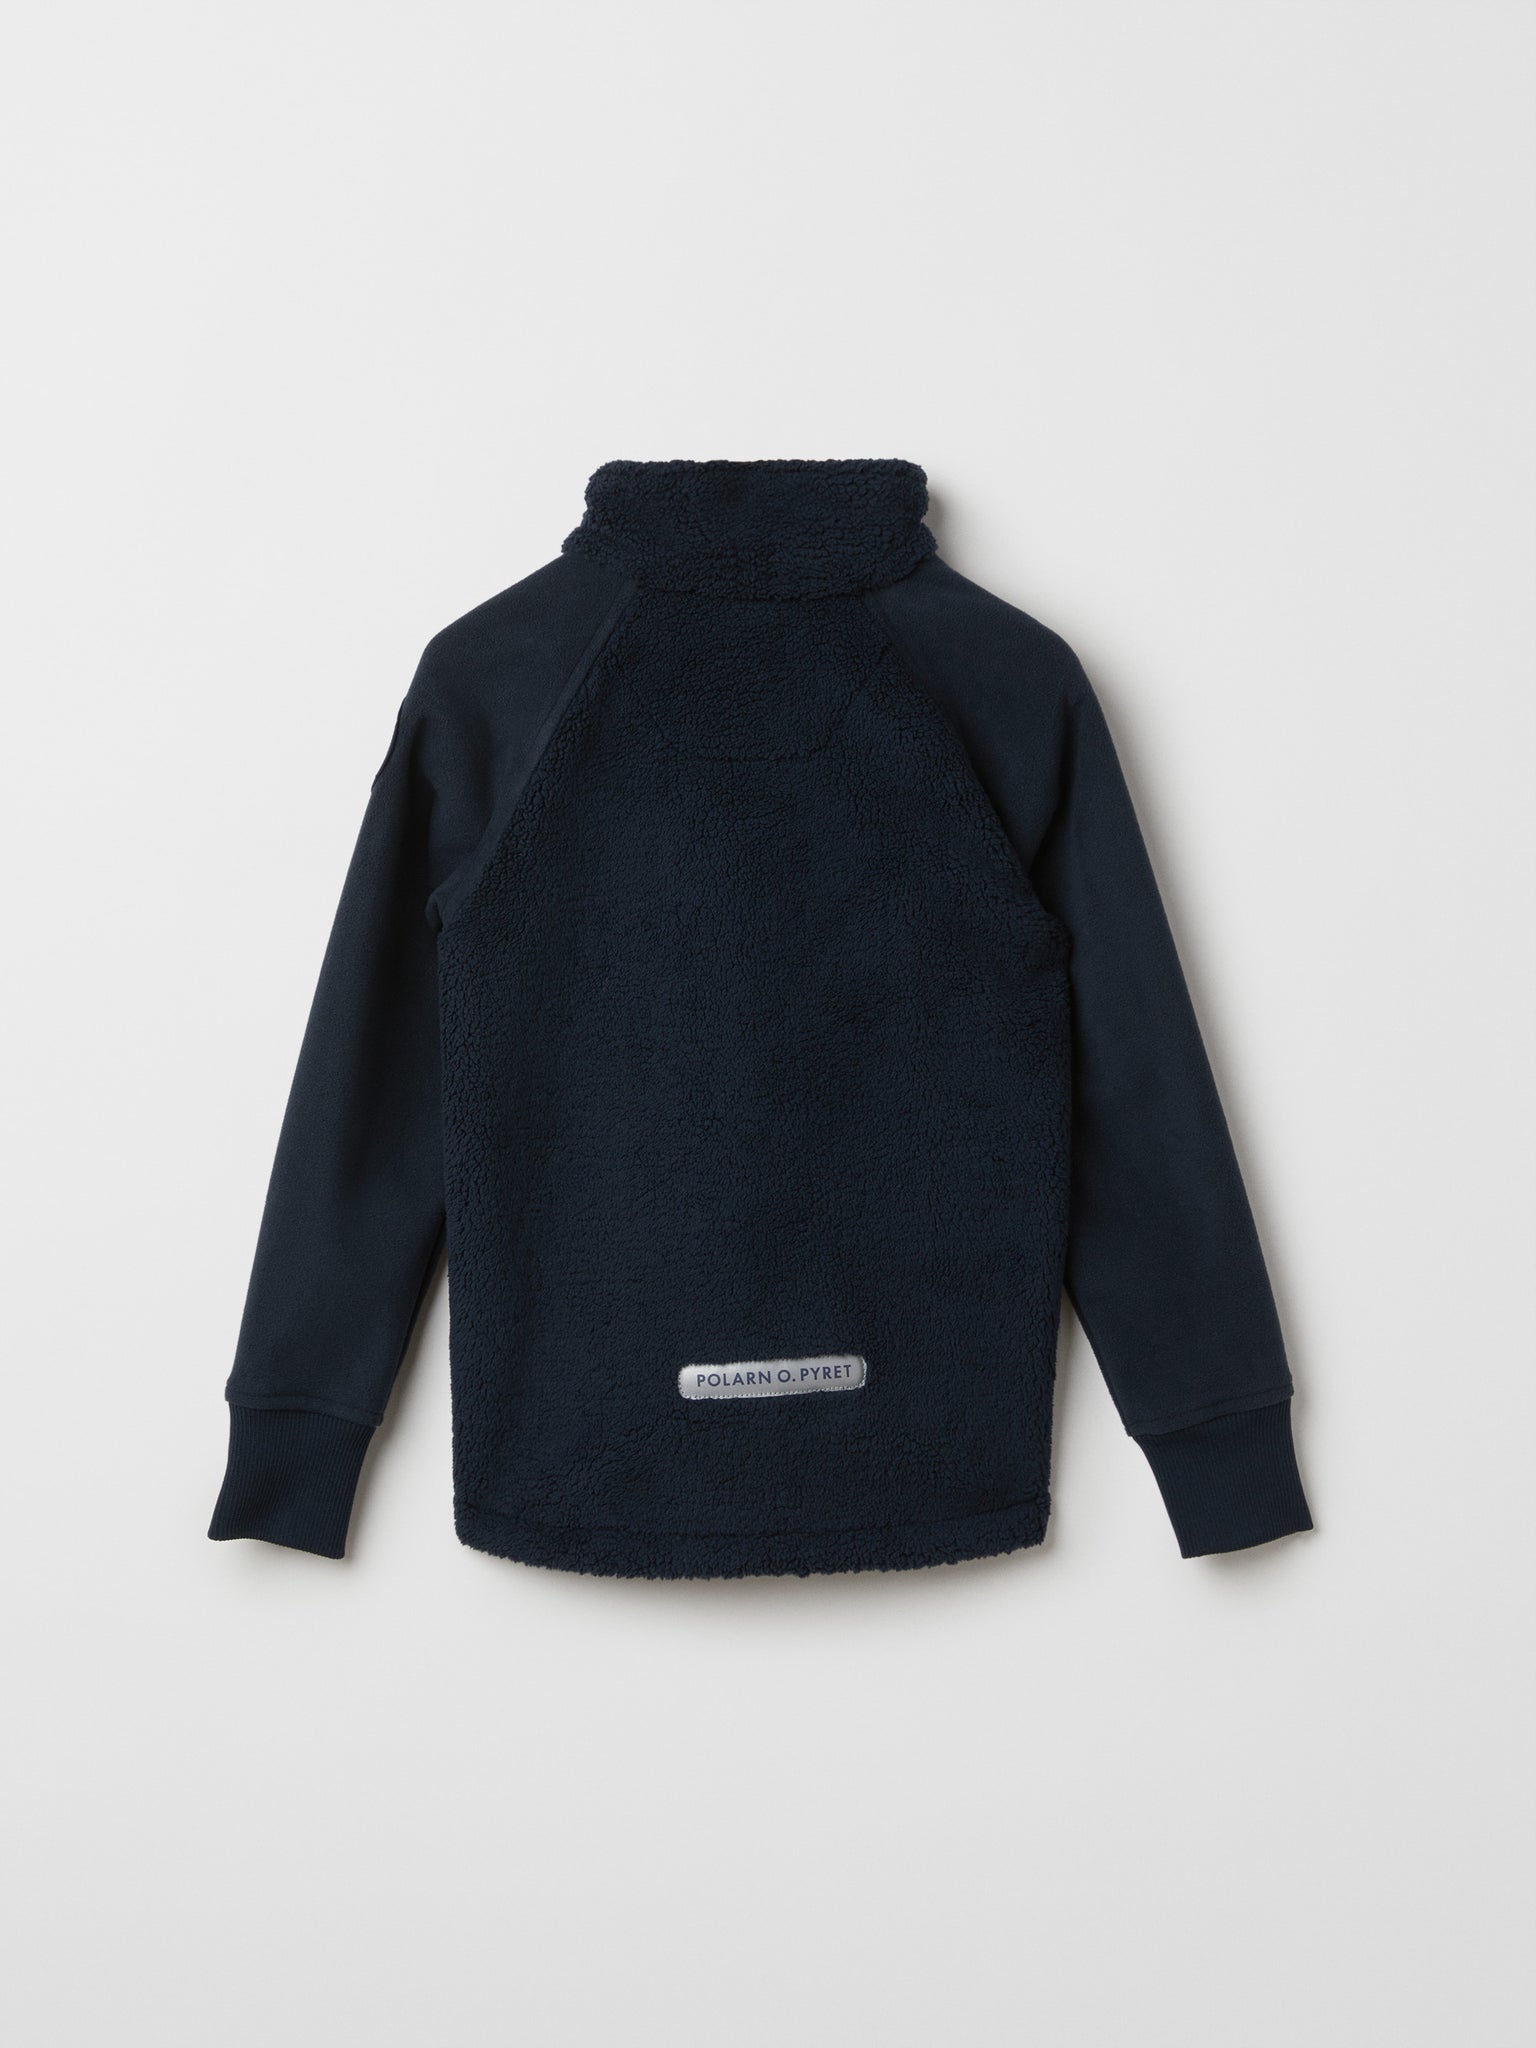 Navy Waterproof Kids Fleece Jacket from the Polarn O. Pyret outerwear collection. The best ethical kids outerwear.